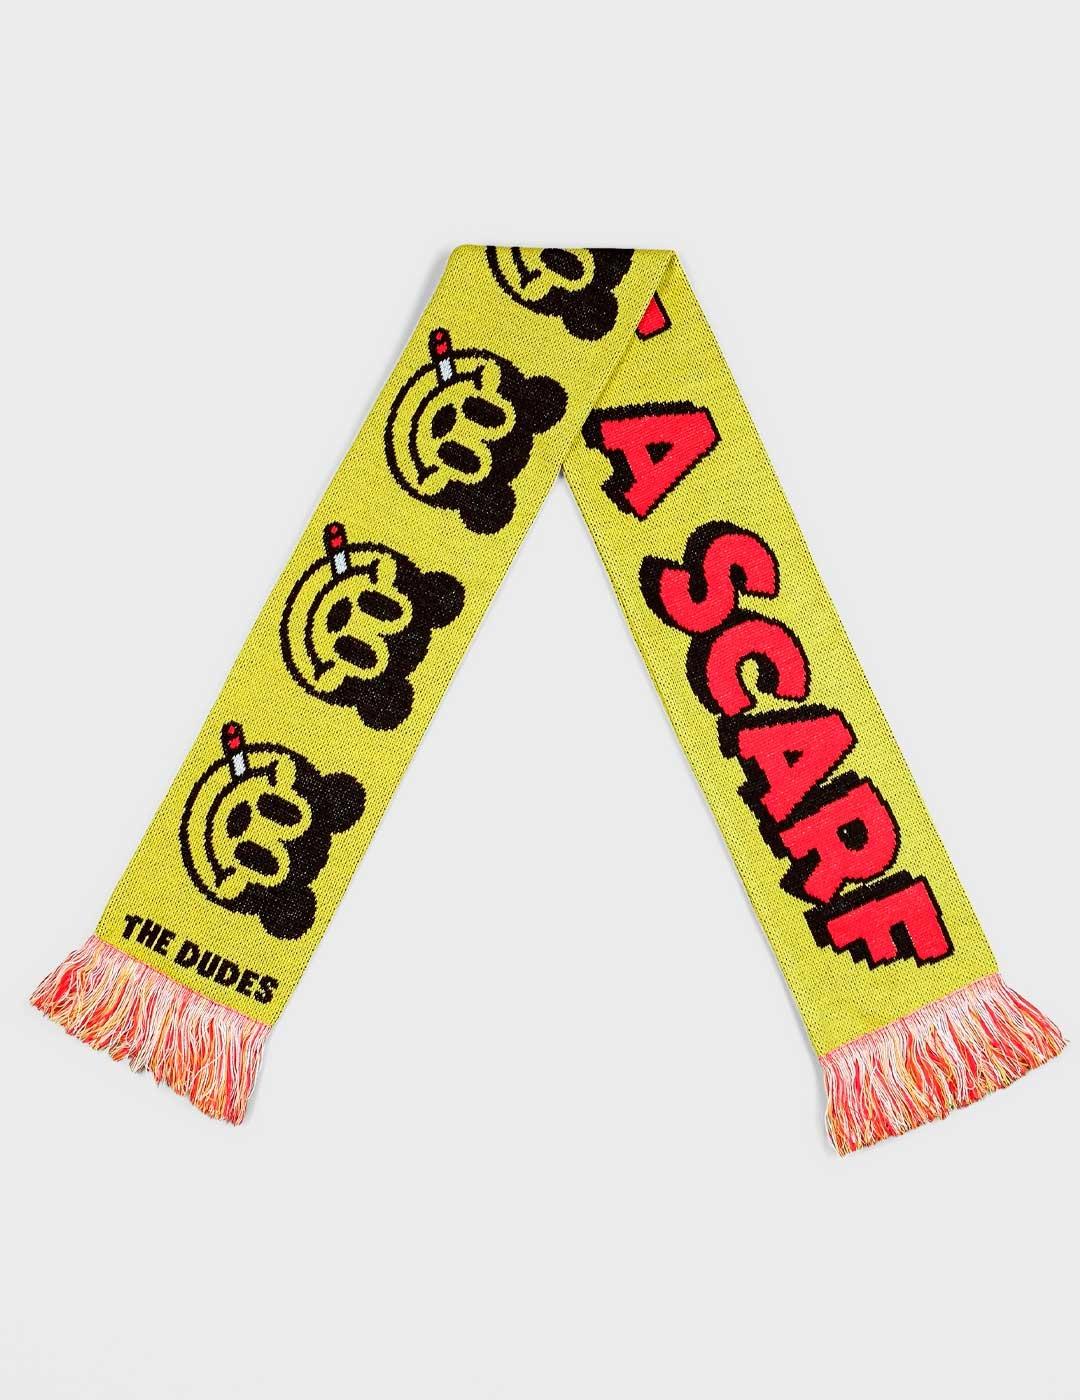 NOT A SCARF